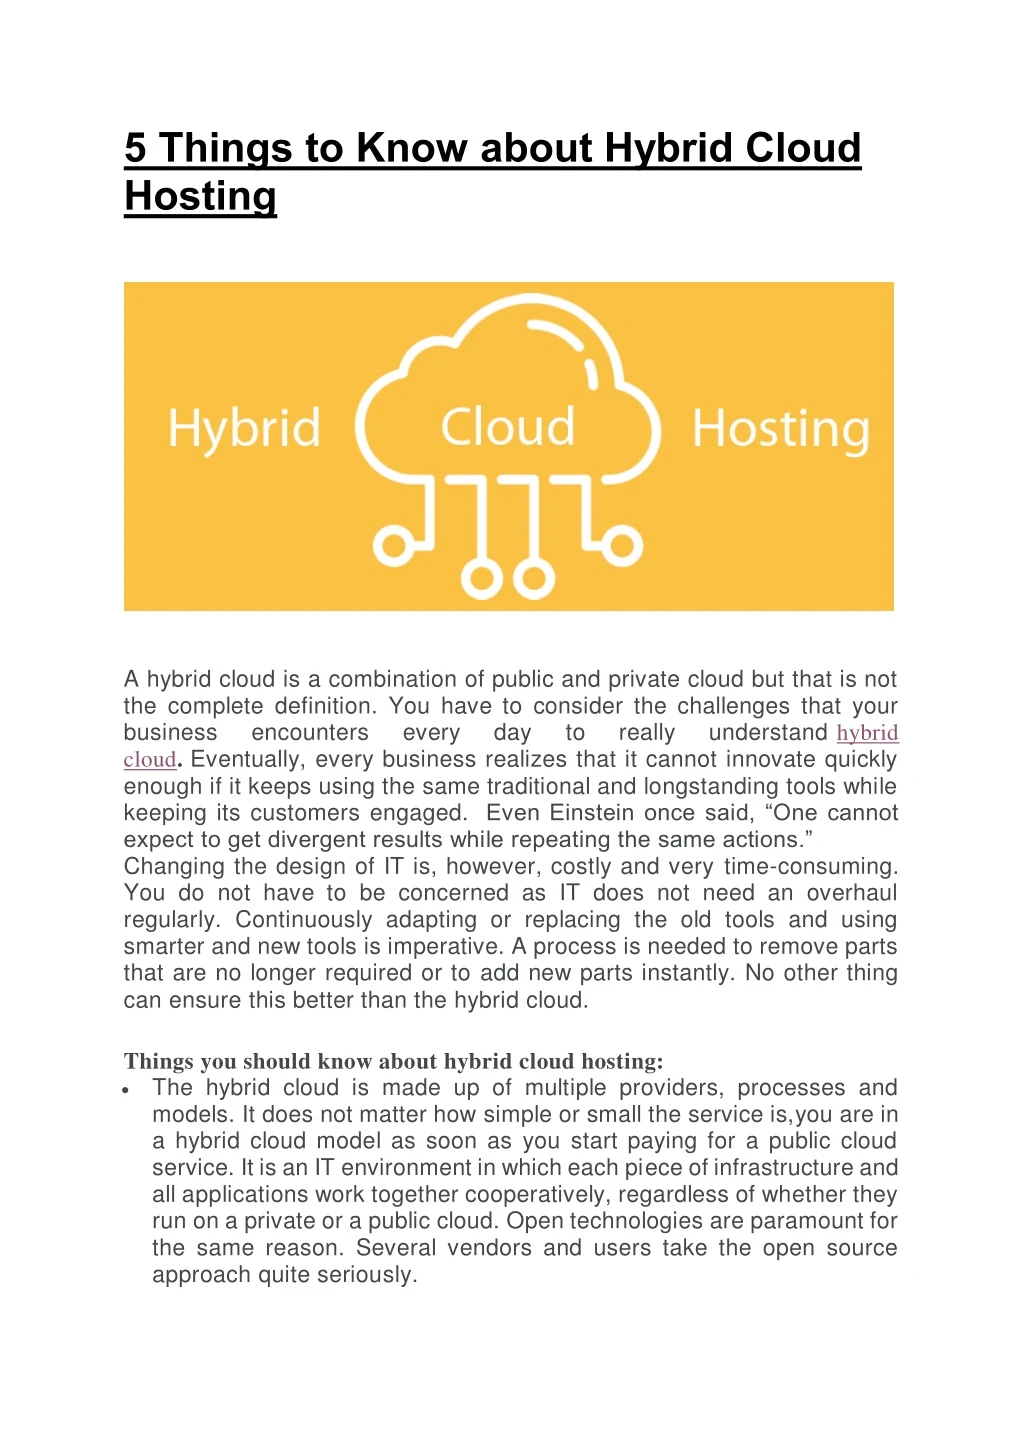 5 things to know about hybrid cloud hosting